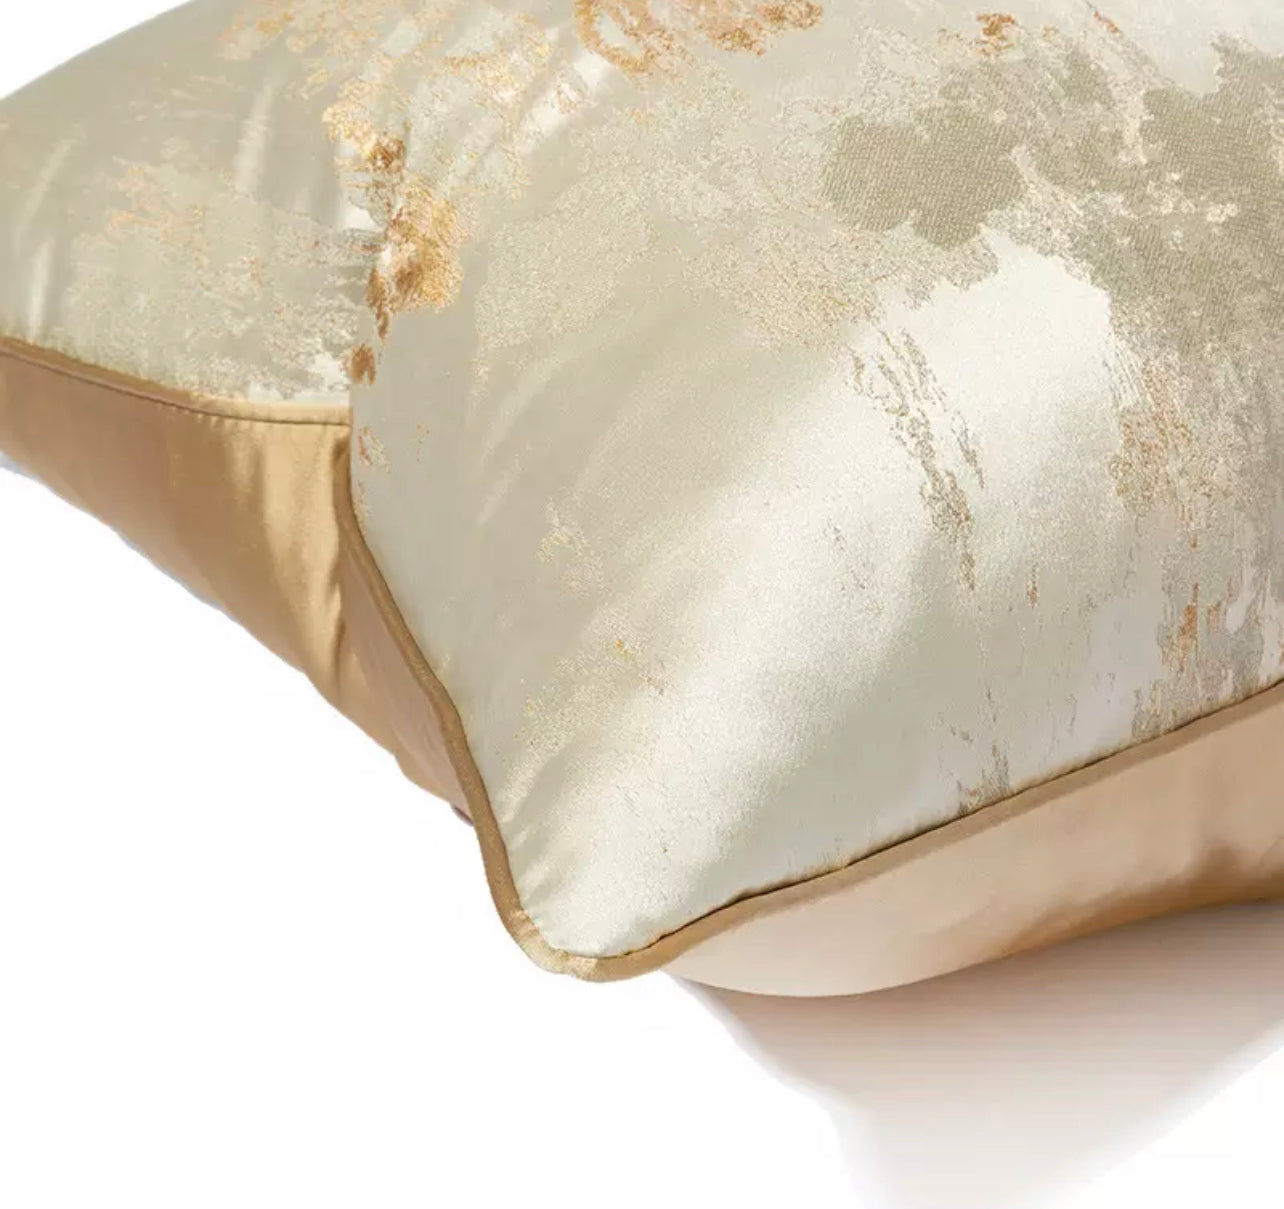 Luxury Wave Gold Cushion Cover